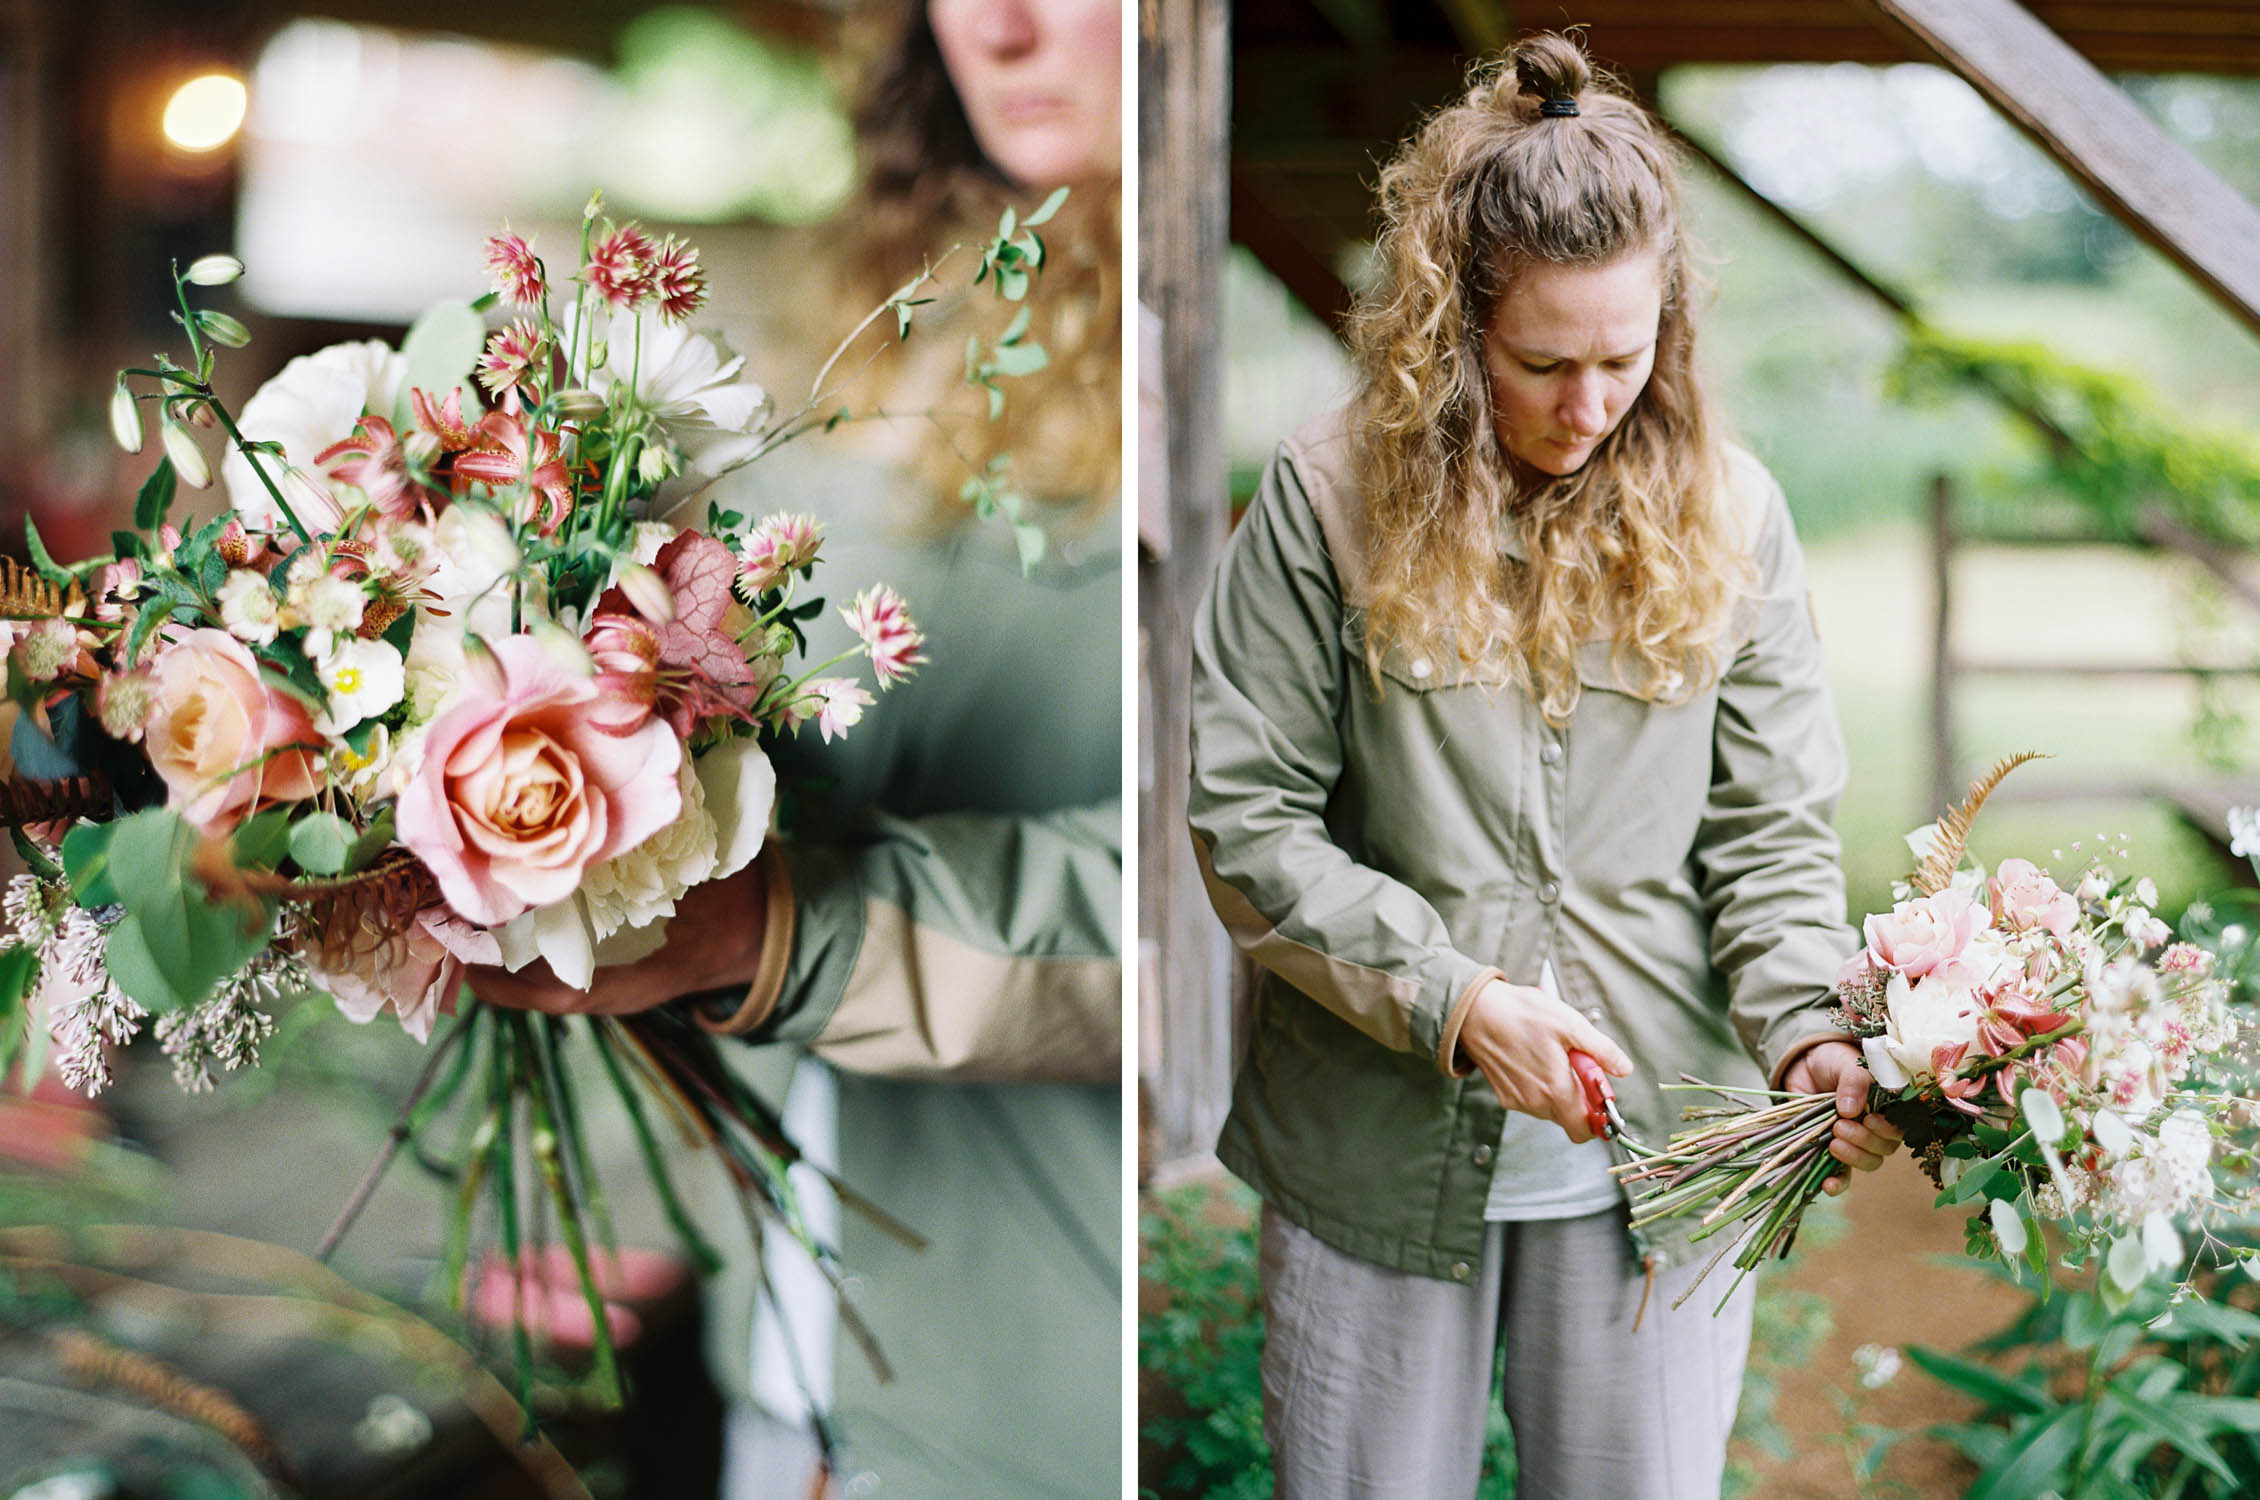 Lifestyle floral photography captured at Wildshoot Farm by Seattle Wedding Photographer Anna Peters